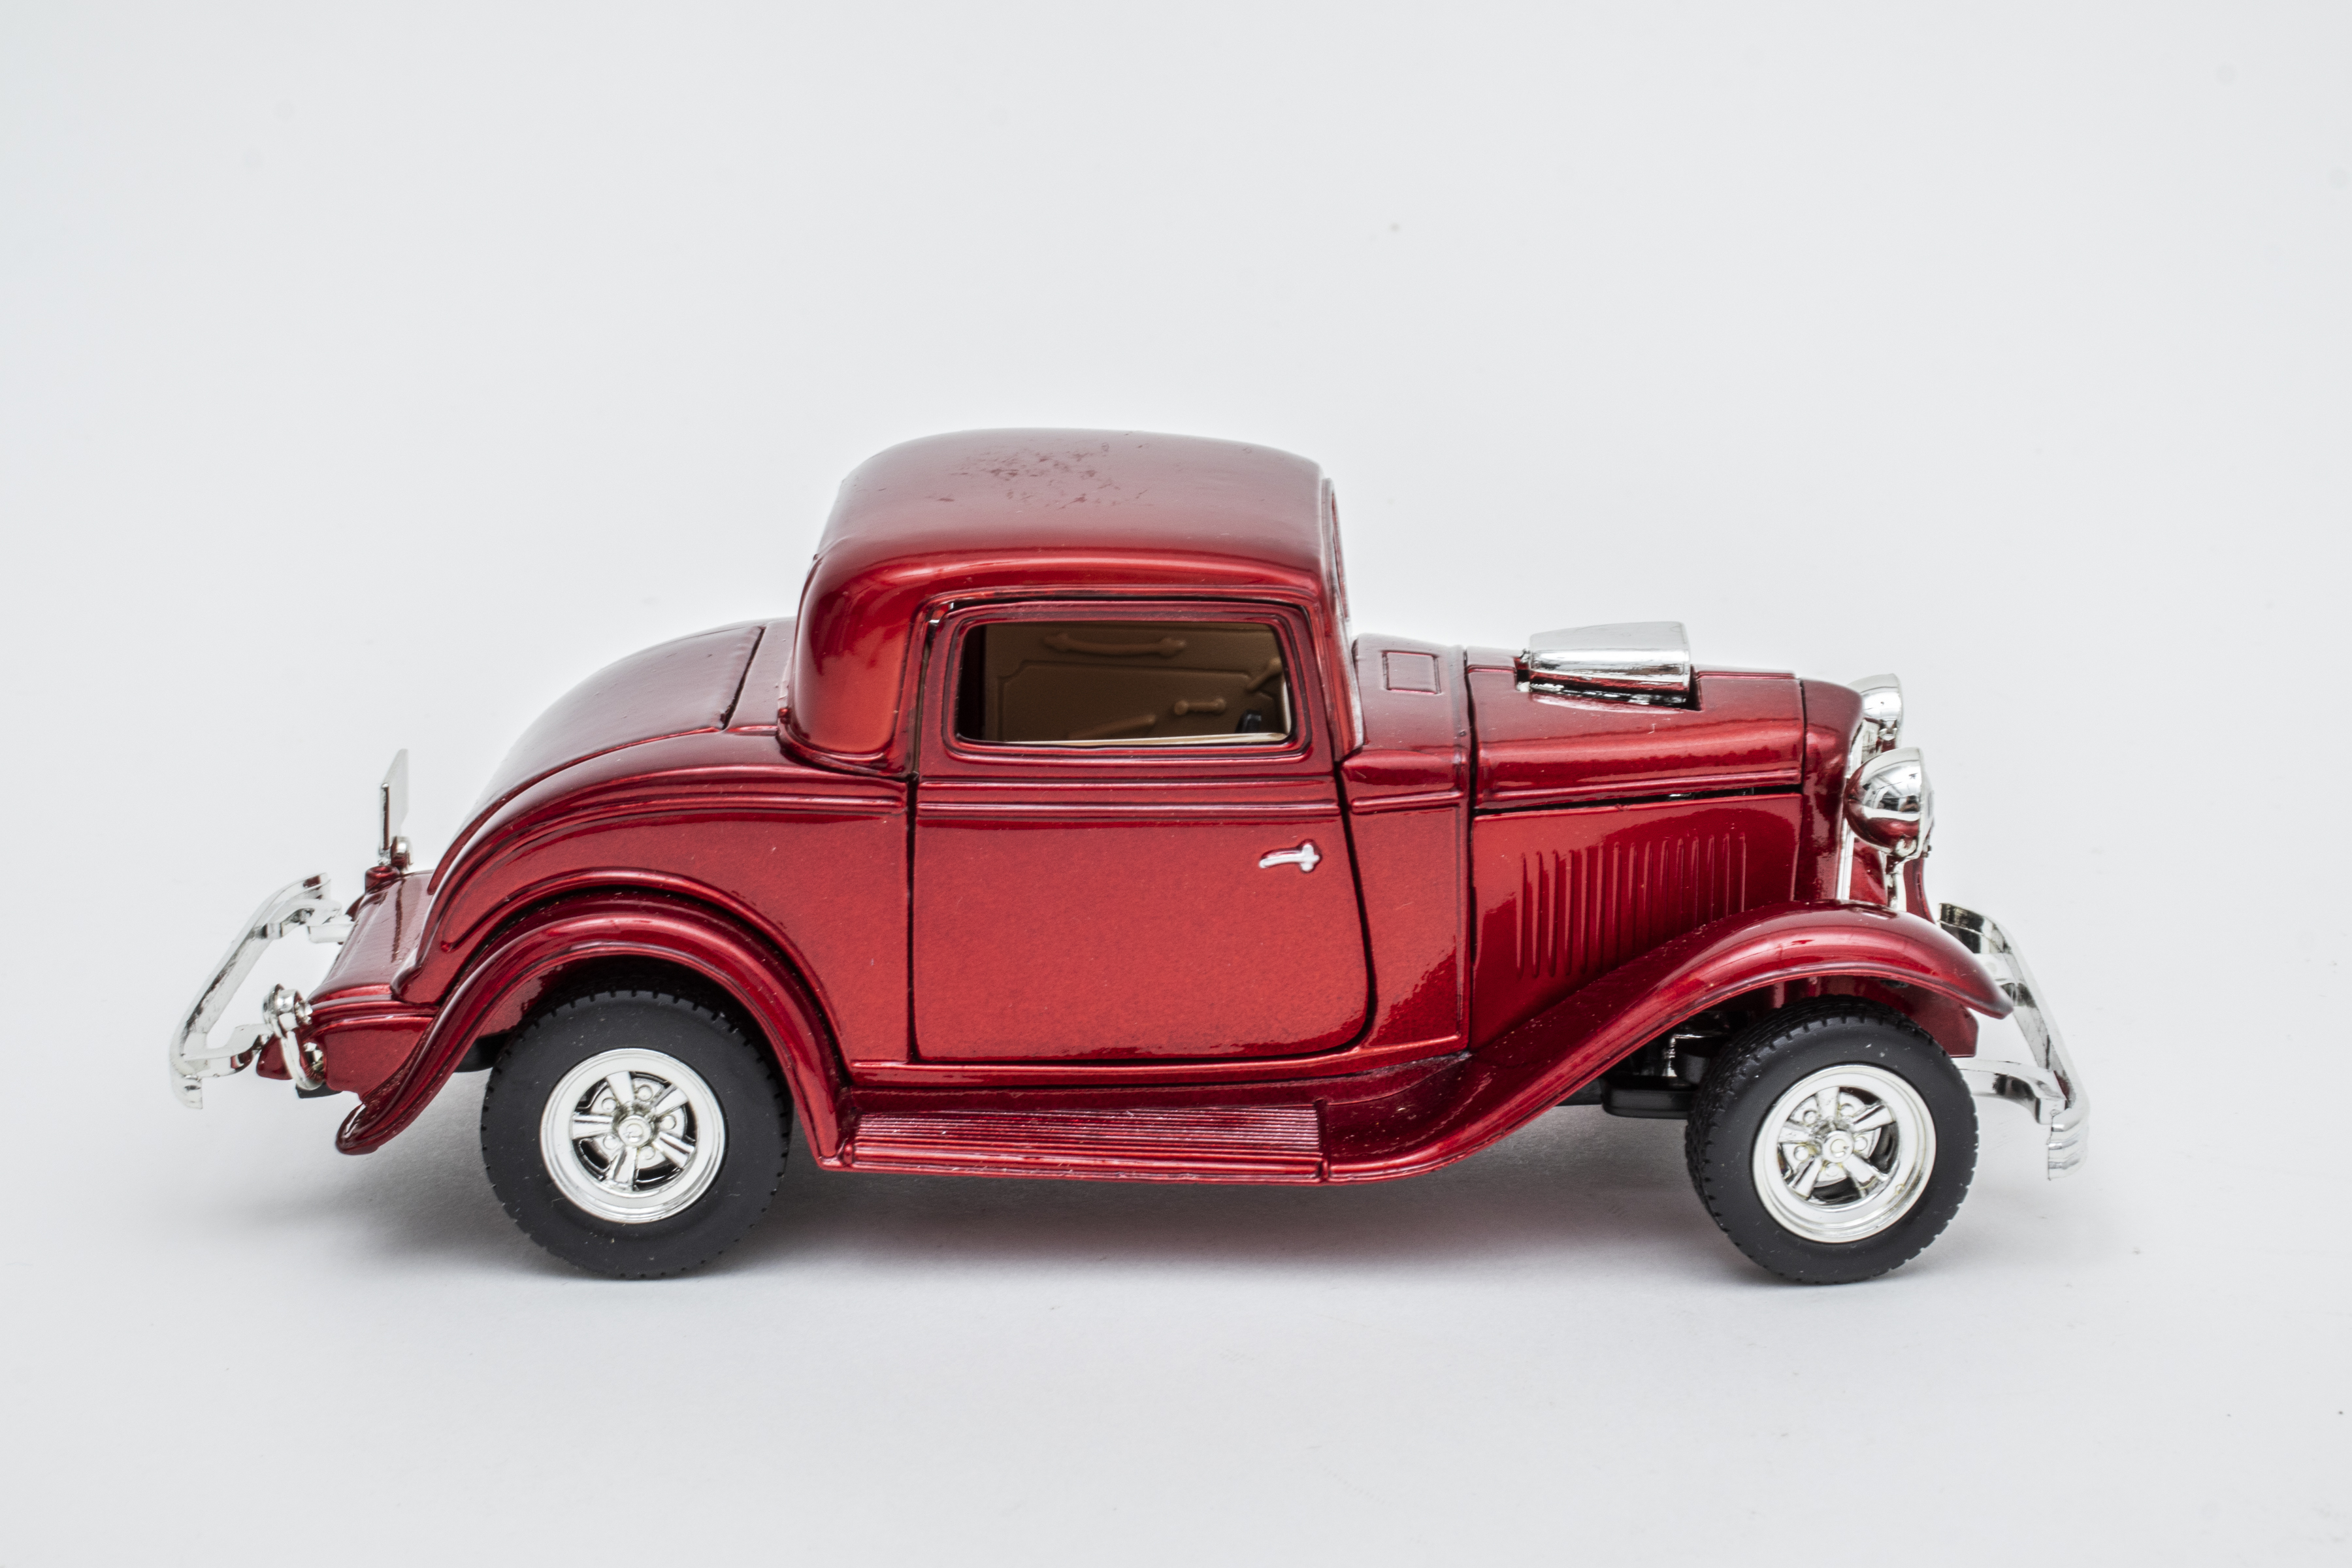 1932 FORD COUPE DIE CAST TOY CAR 3c4589